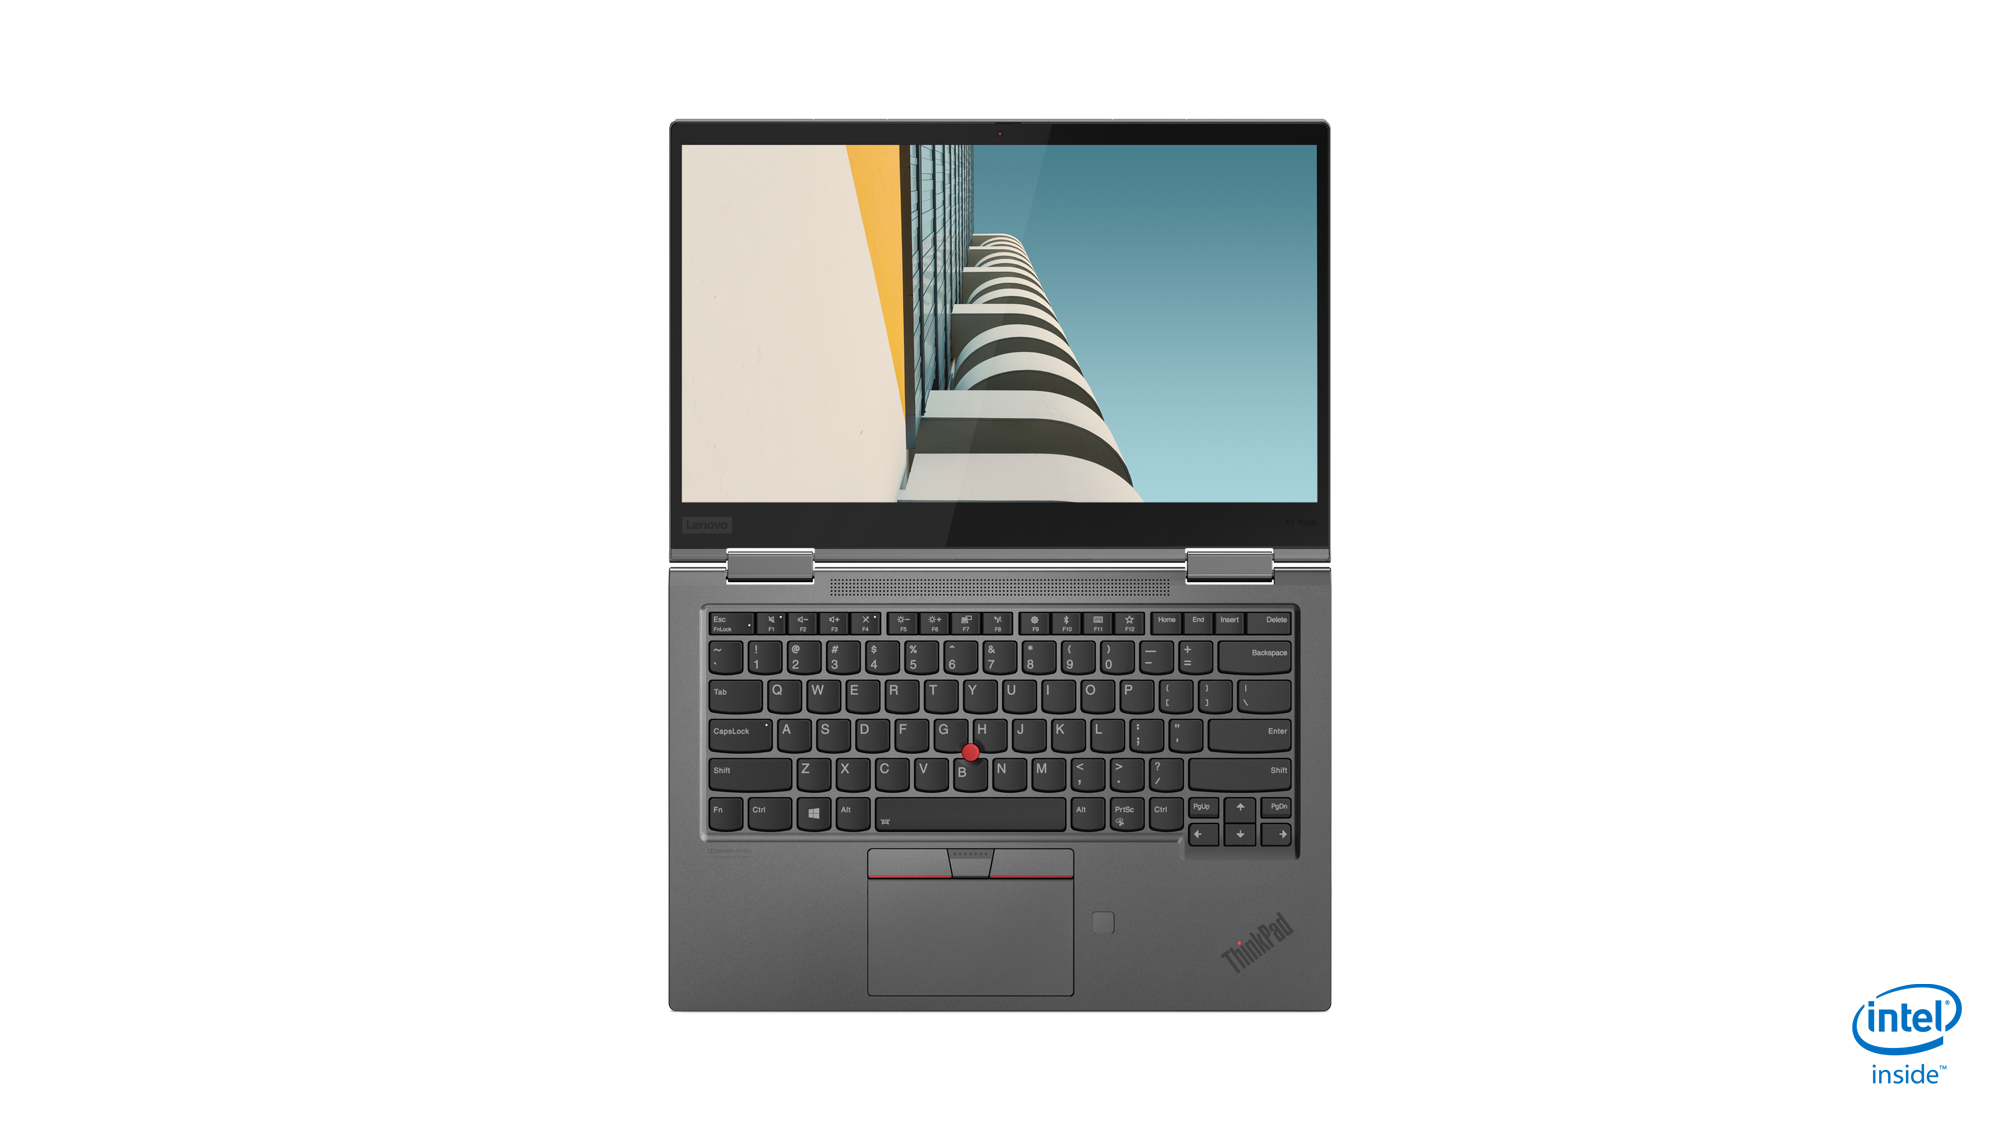 lenovo updated thinkpad x1 carbon yoga ces 2019 20 tour front facing b c cover